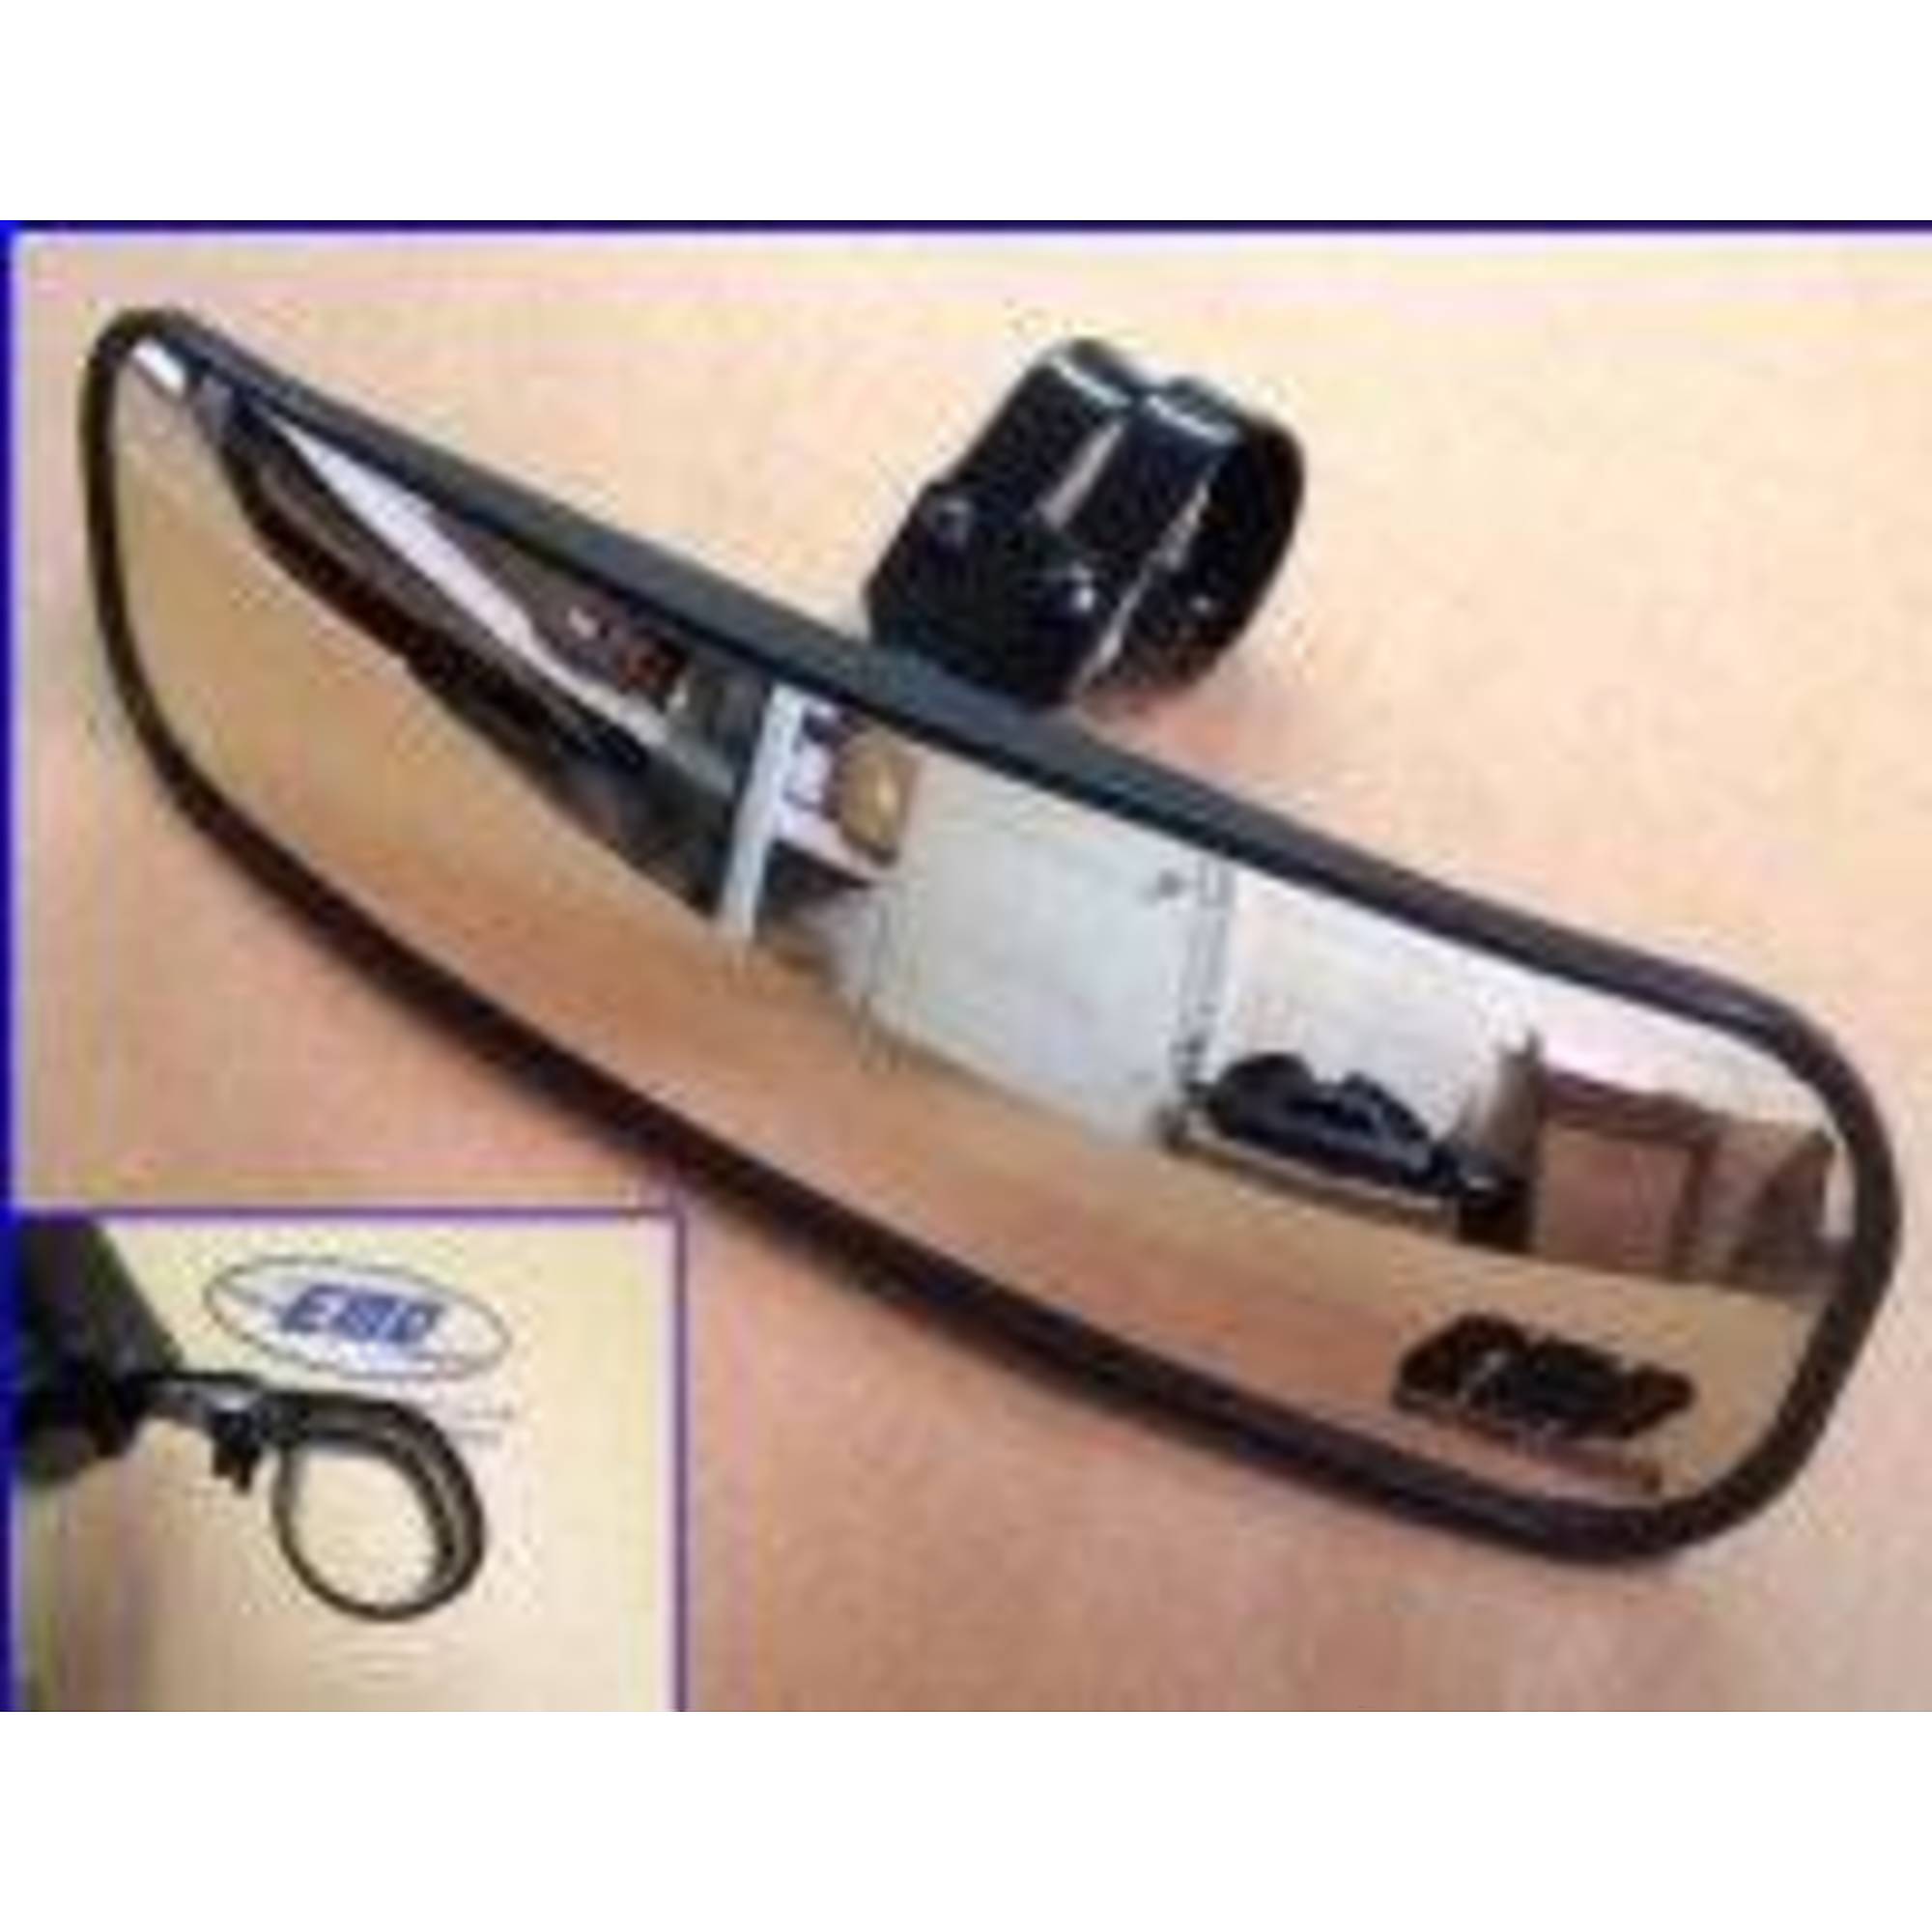 Panoramic Rear Mirror (1-3/4Inch) - (1-7/8Inch), Model - Extreme Metal Products 12533-1.75-1.875 inch